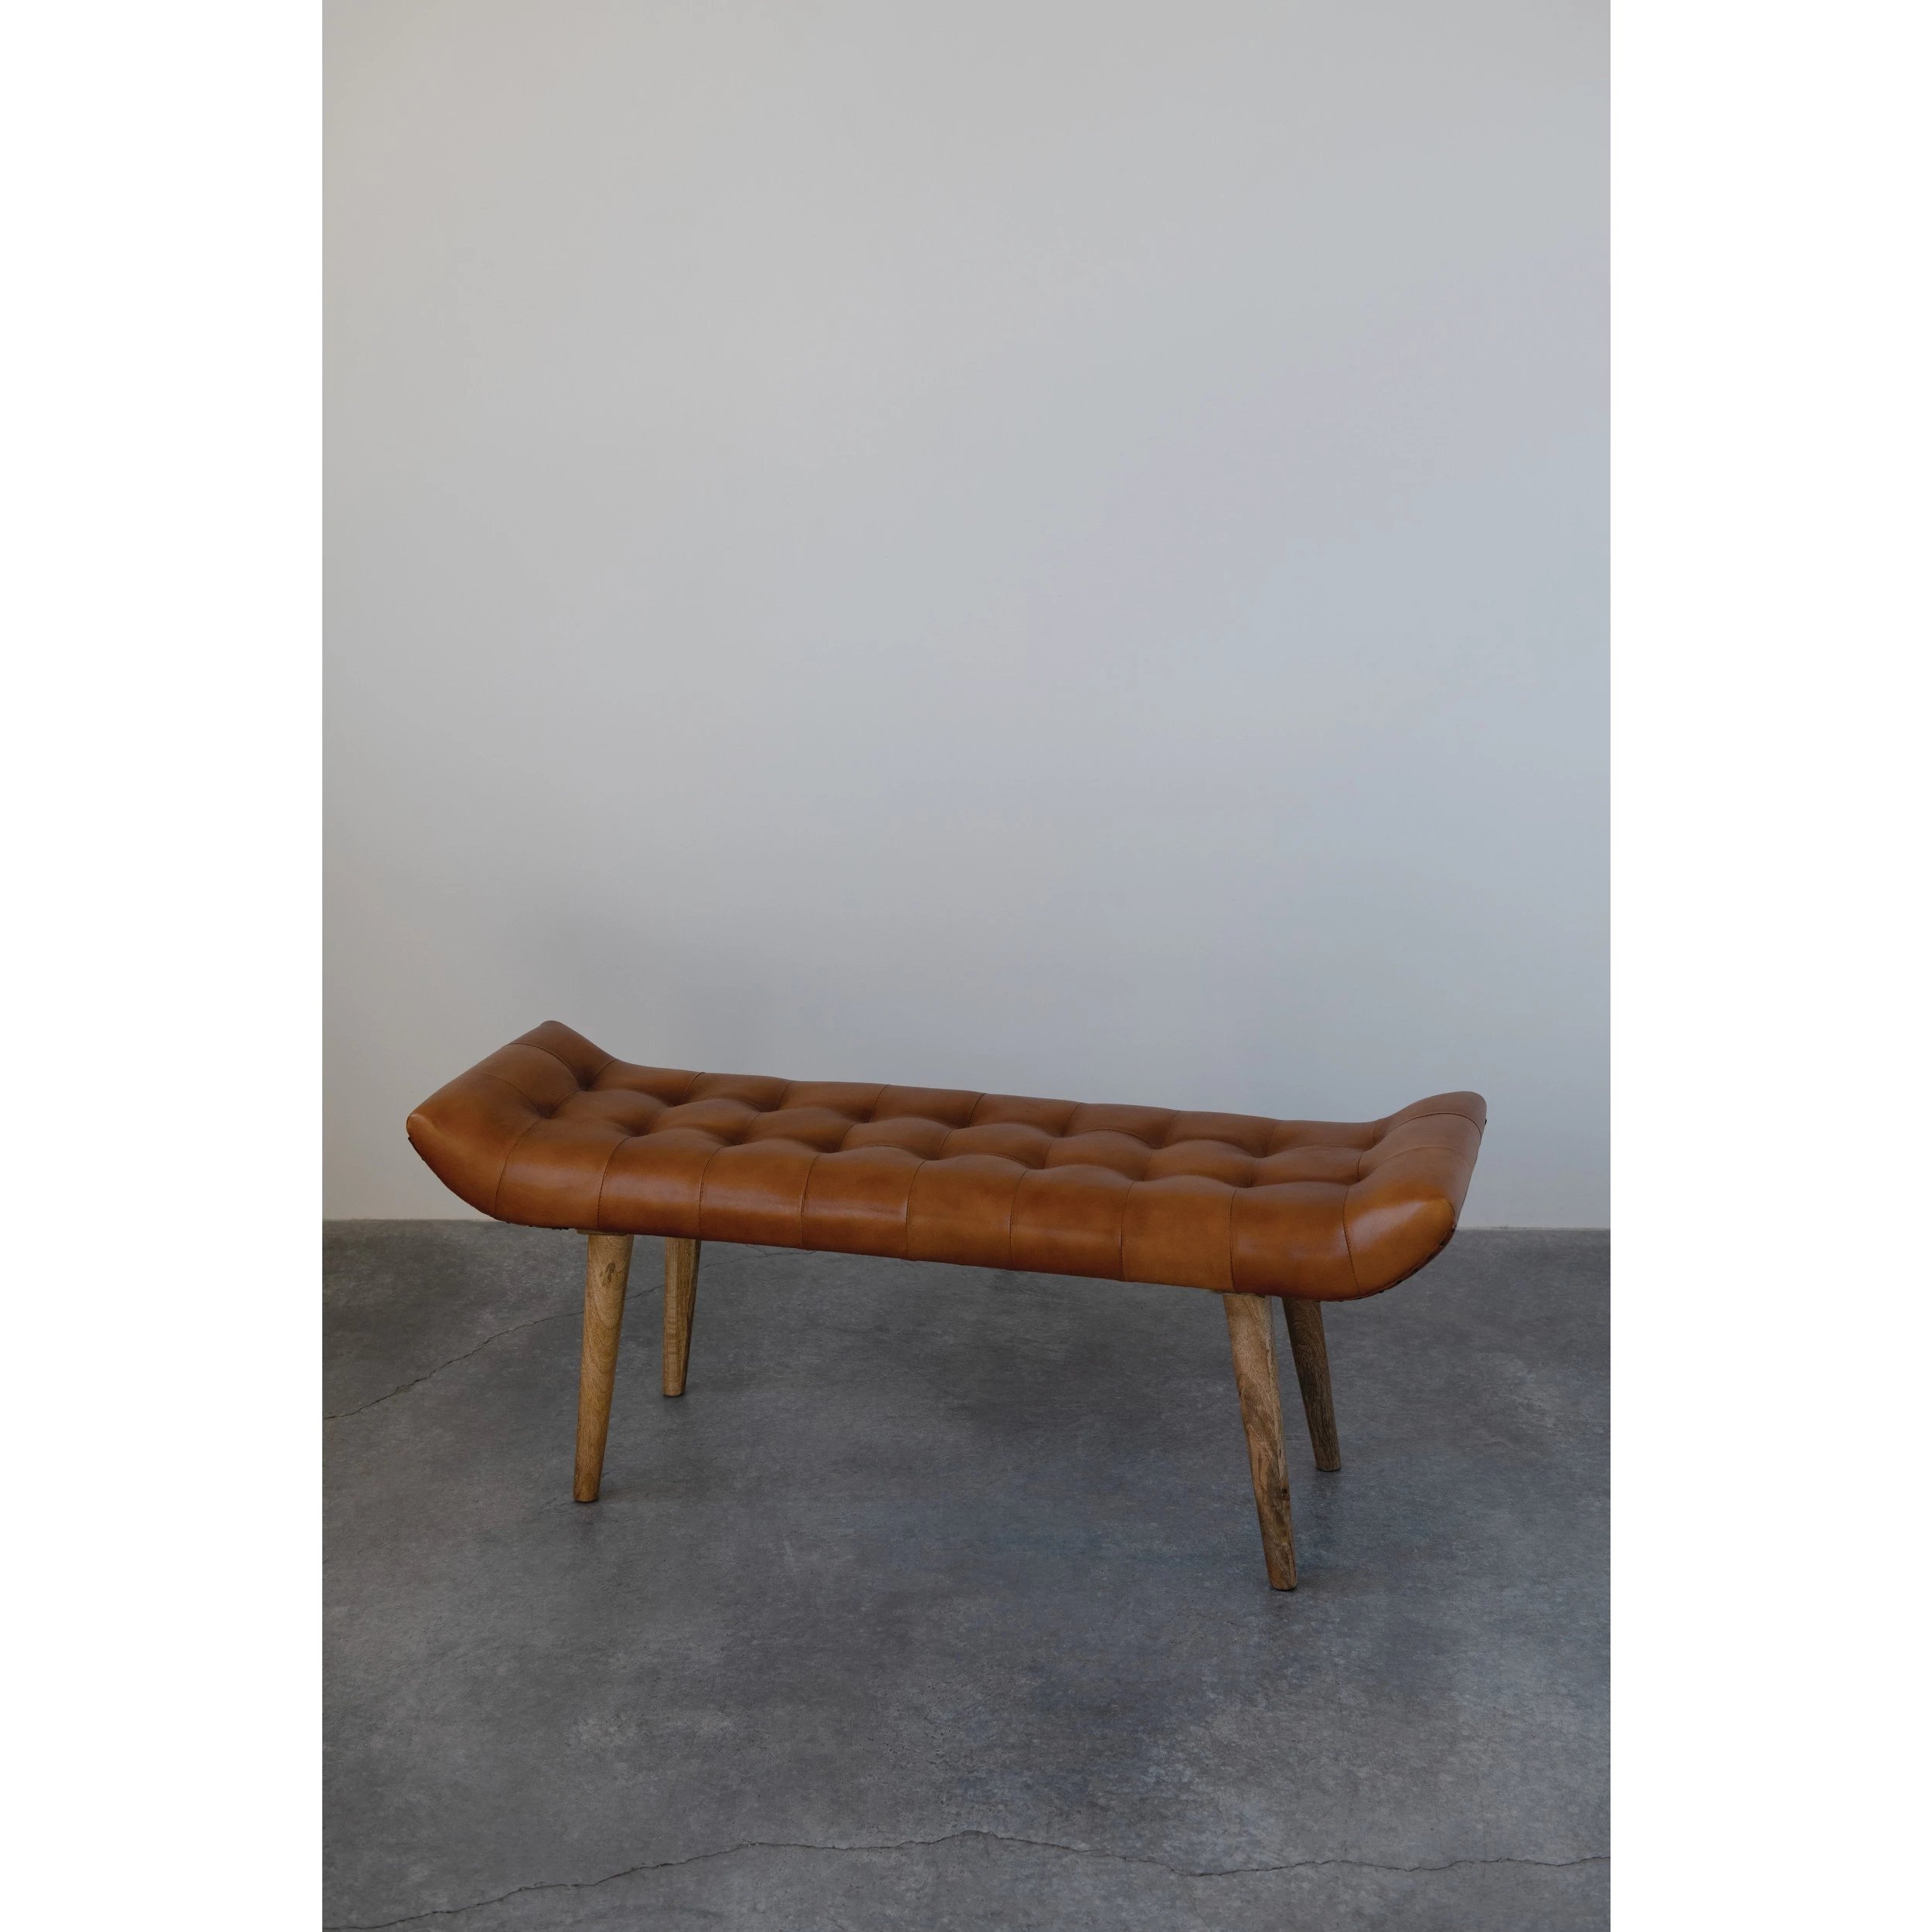 Leather Tufted Bench with Mango Wood Legs - Image 1